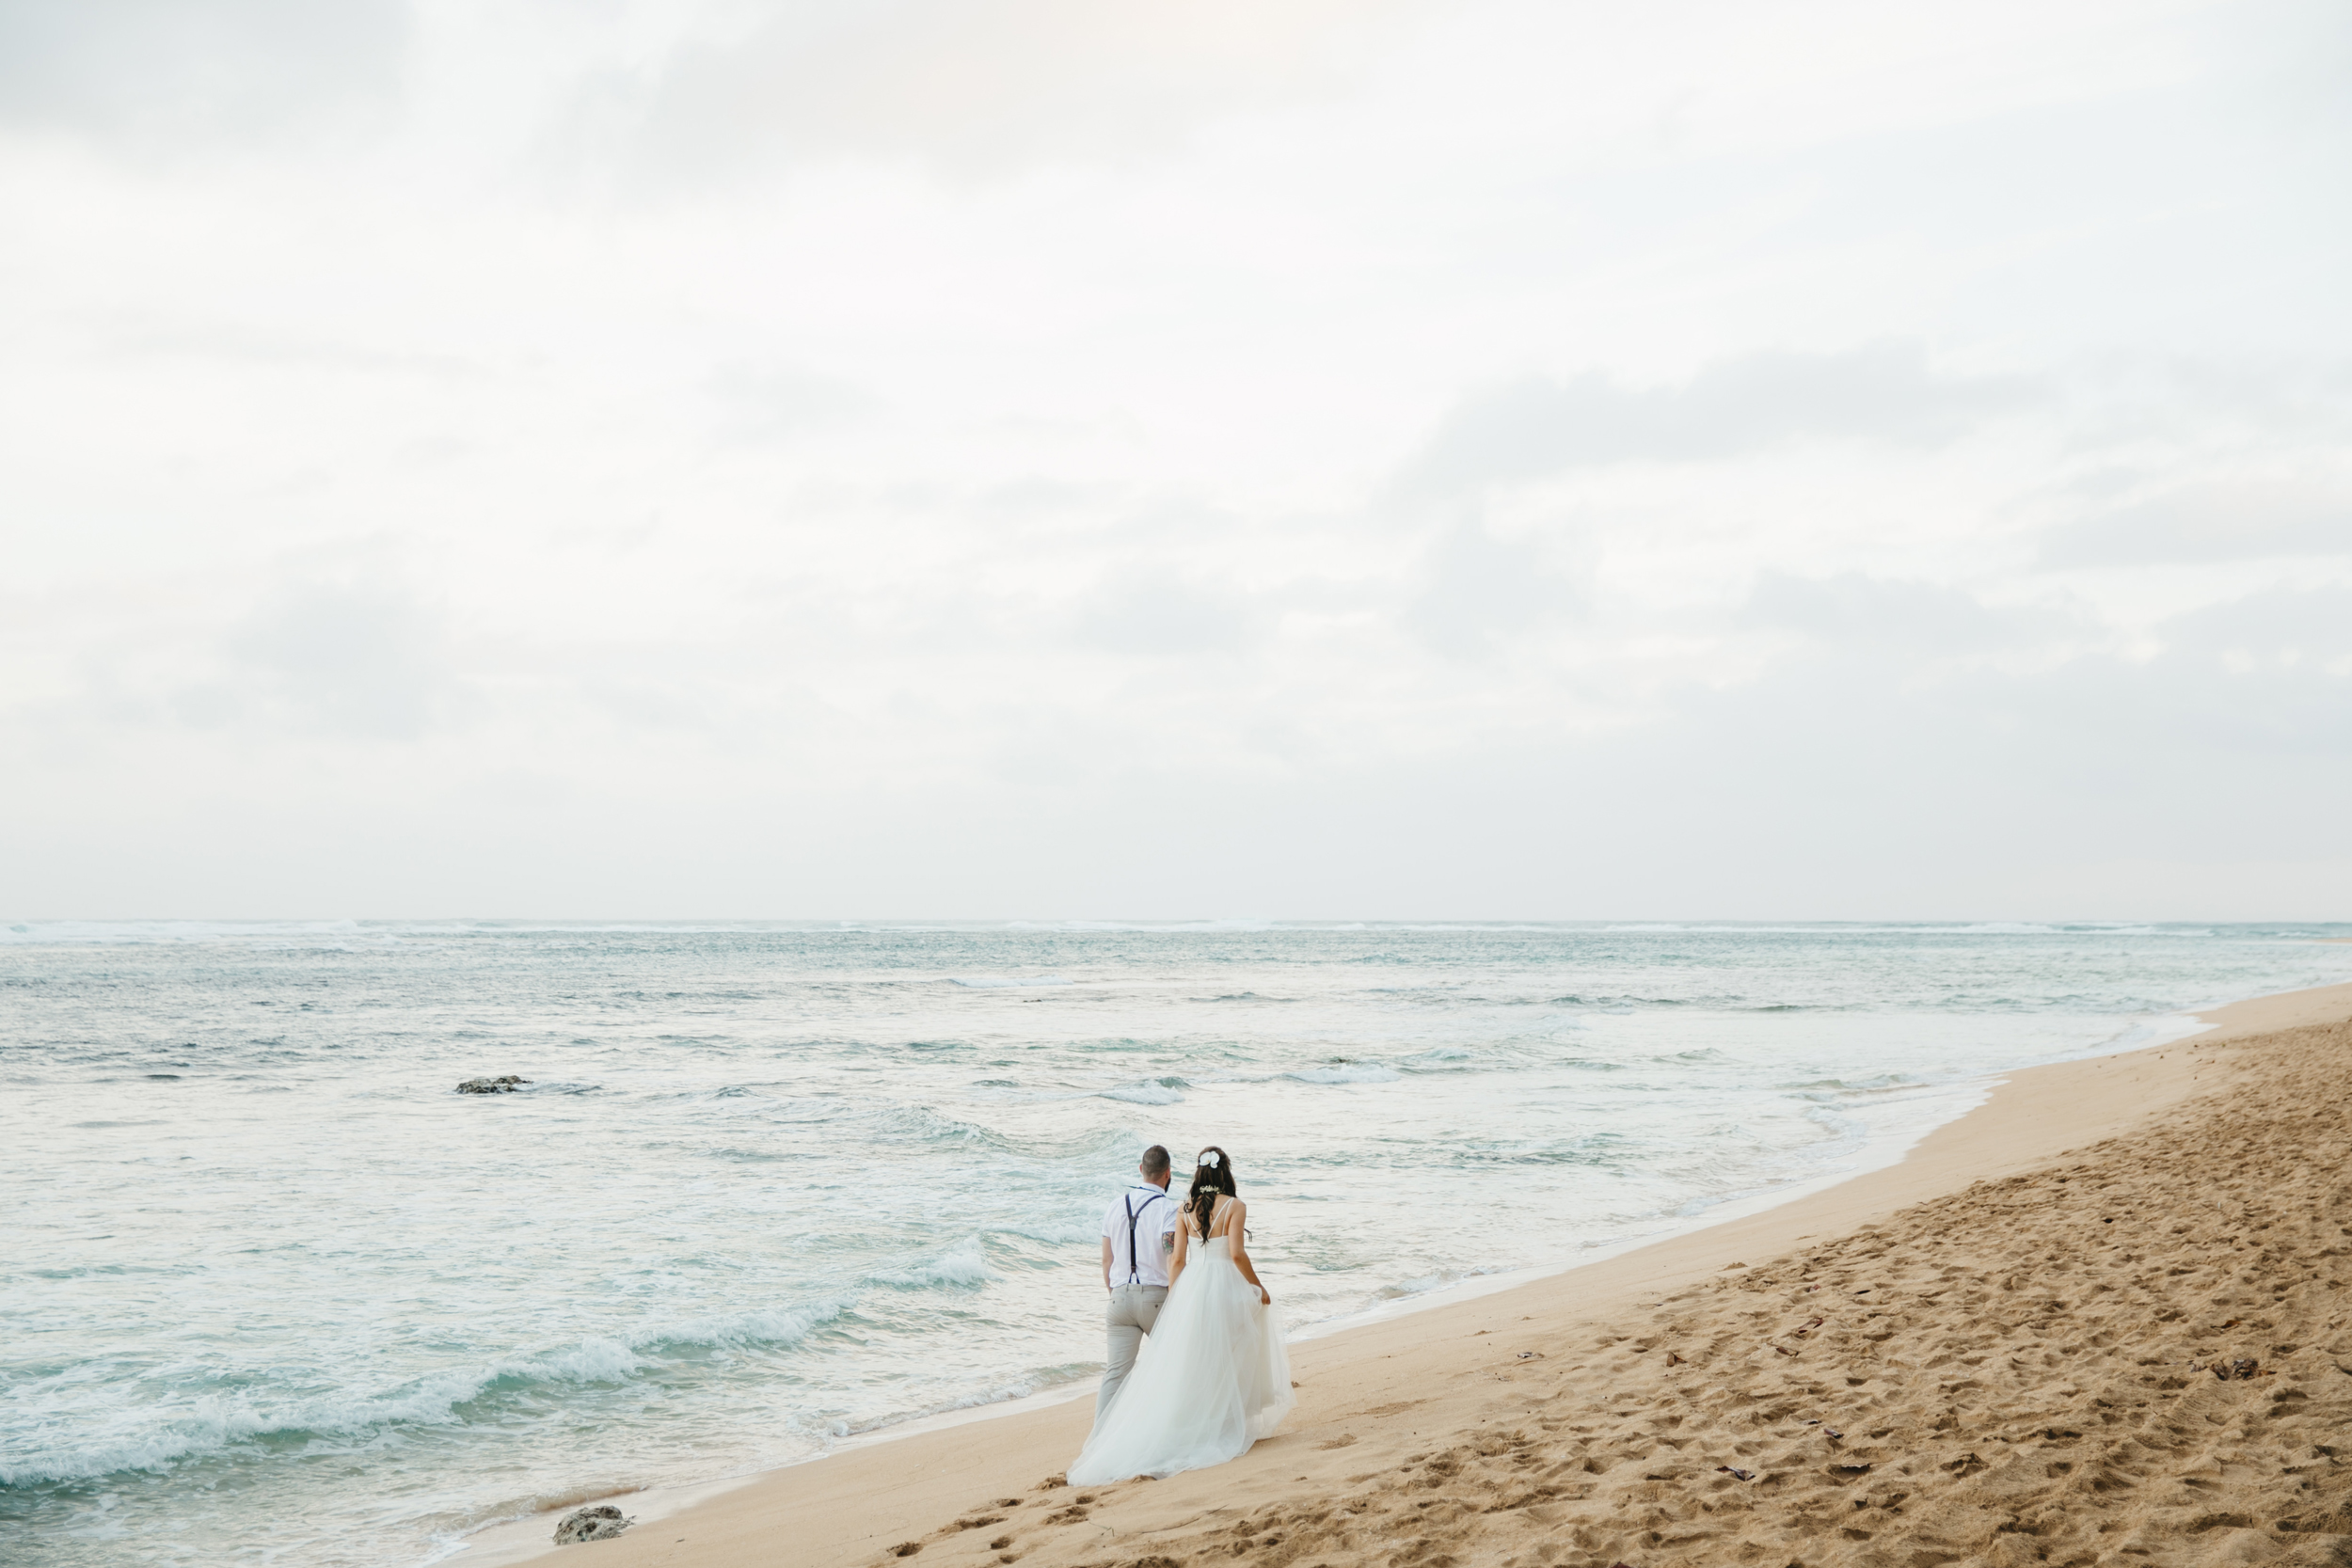 A couple walks on the beach after Tunnels Beach Elopement Ceremony by Kauai Wedding Photographers Colby and Jess